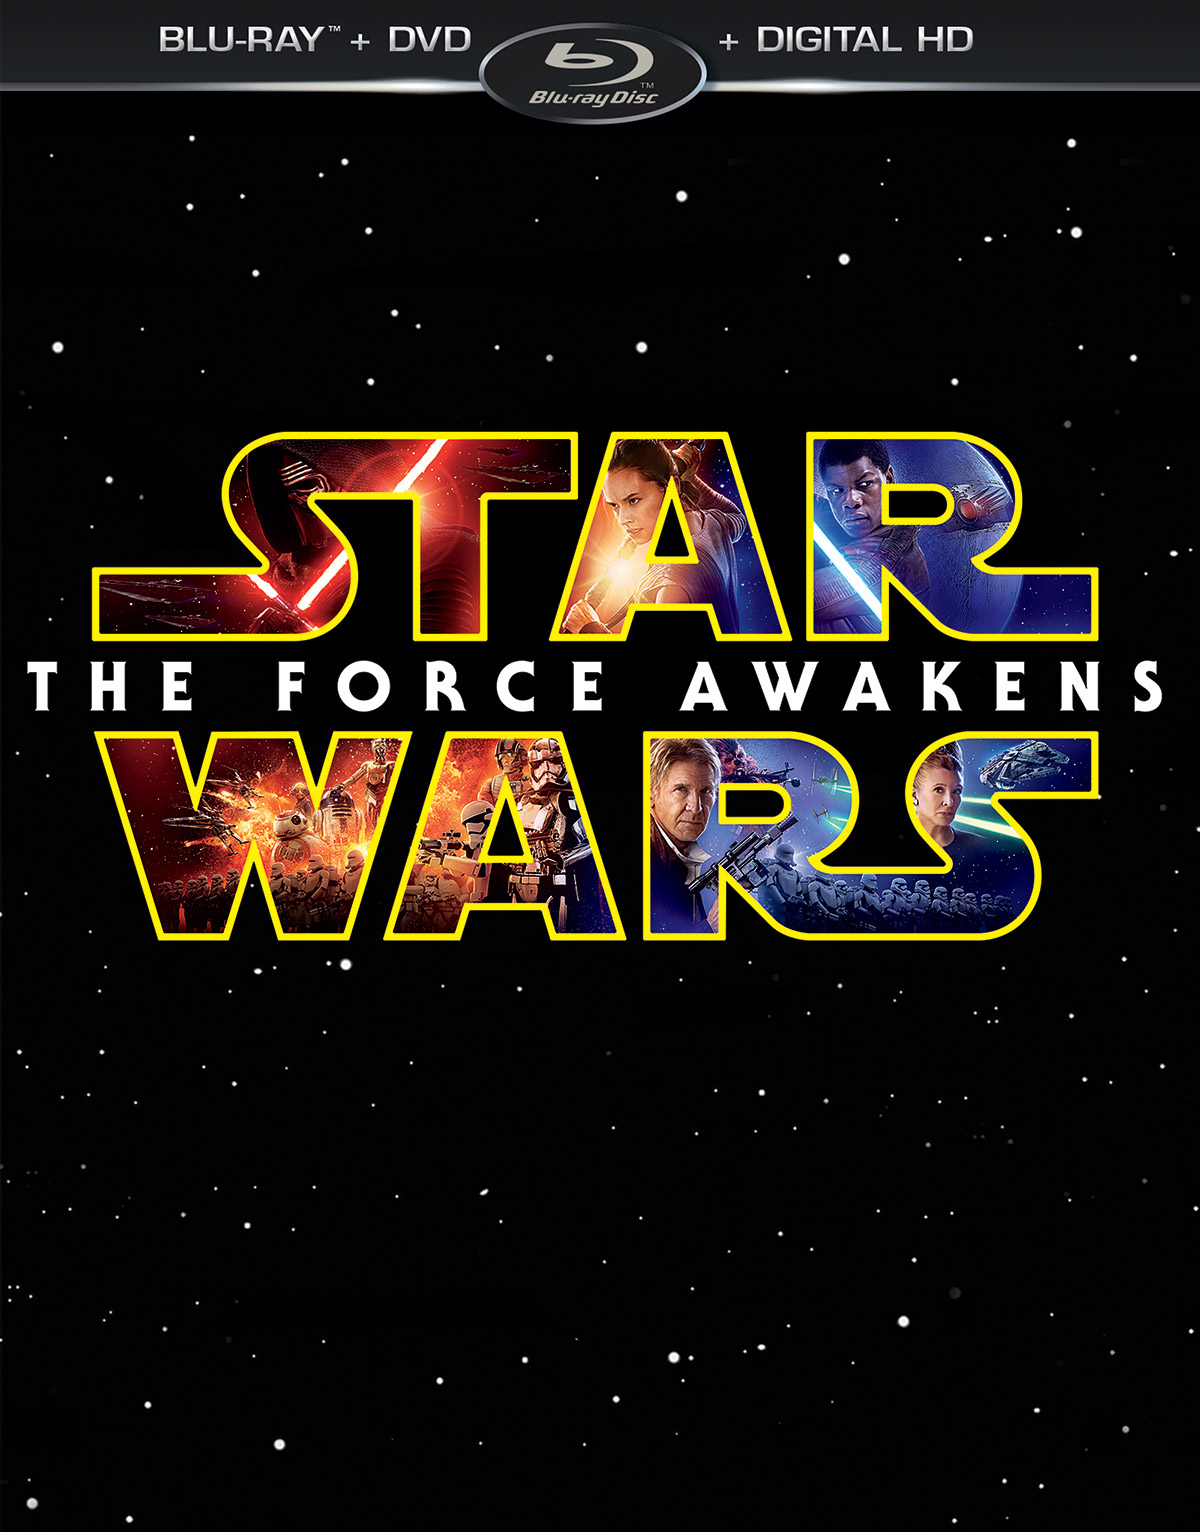 star-wars-the-force-awakens-blu-ray-dvd-cover-art-images